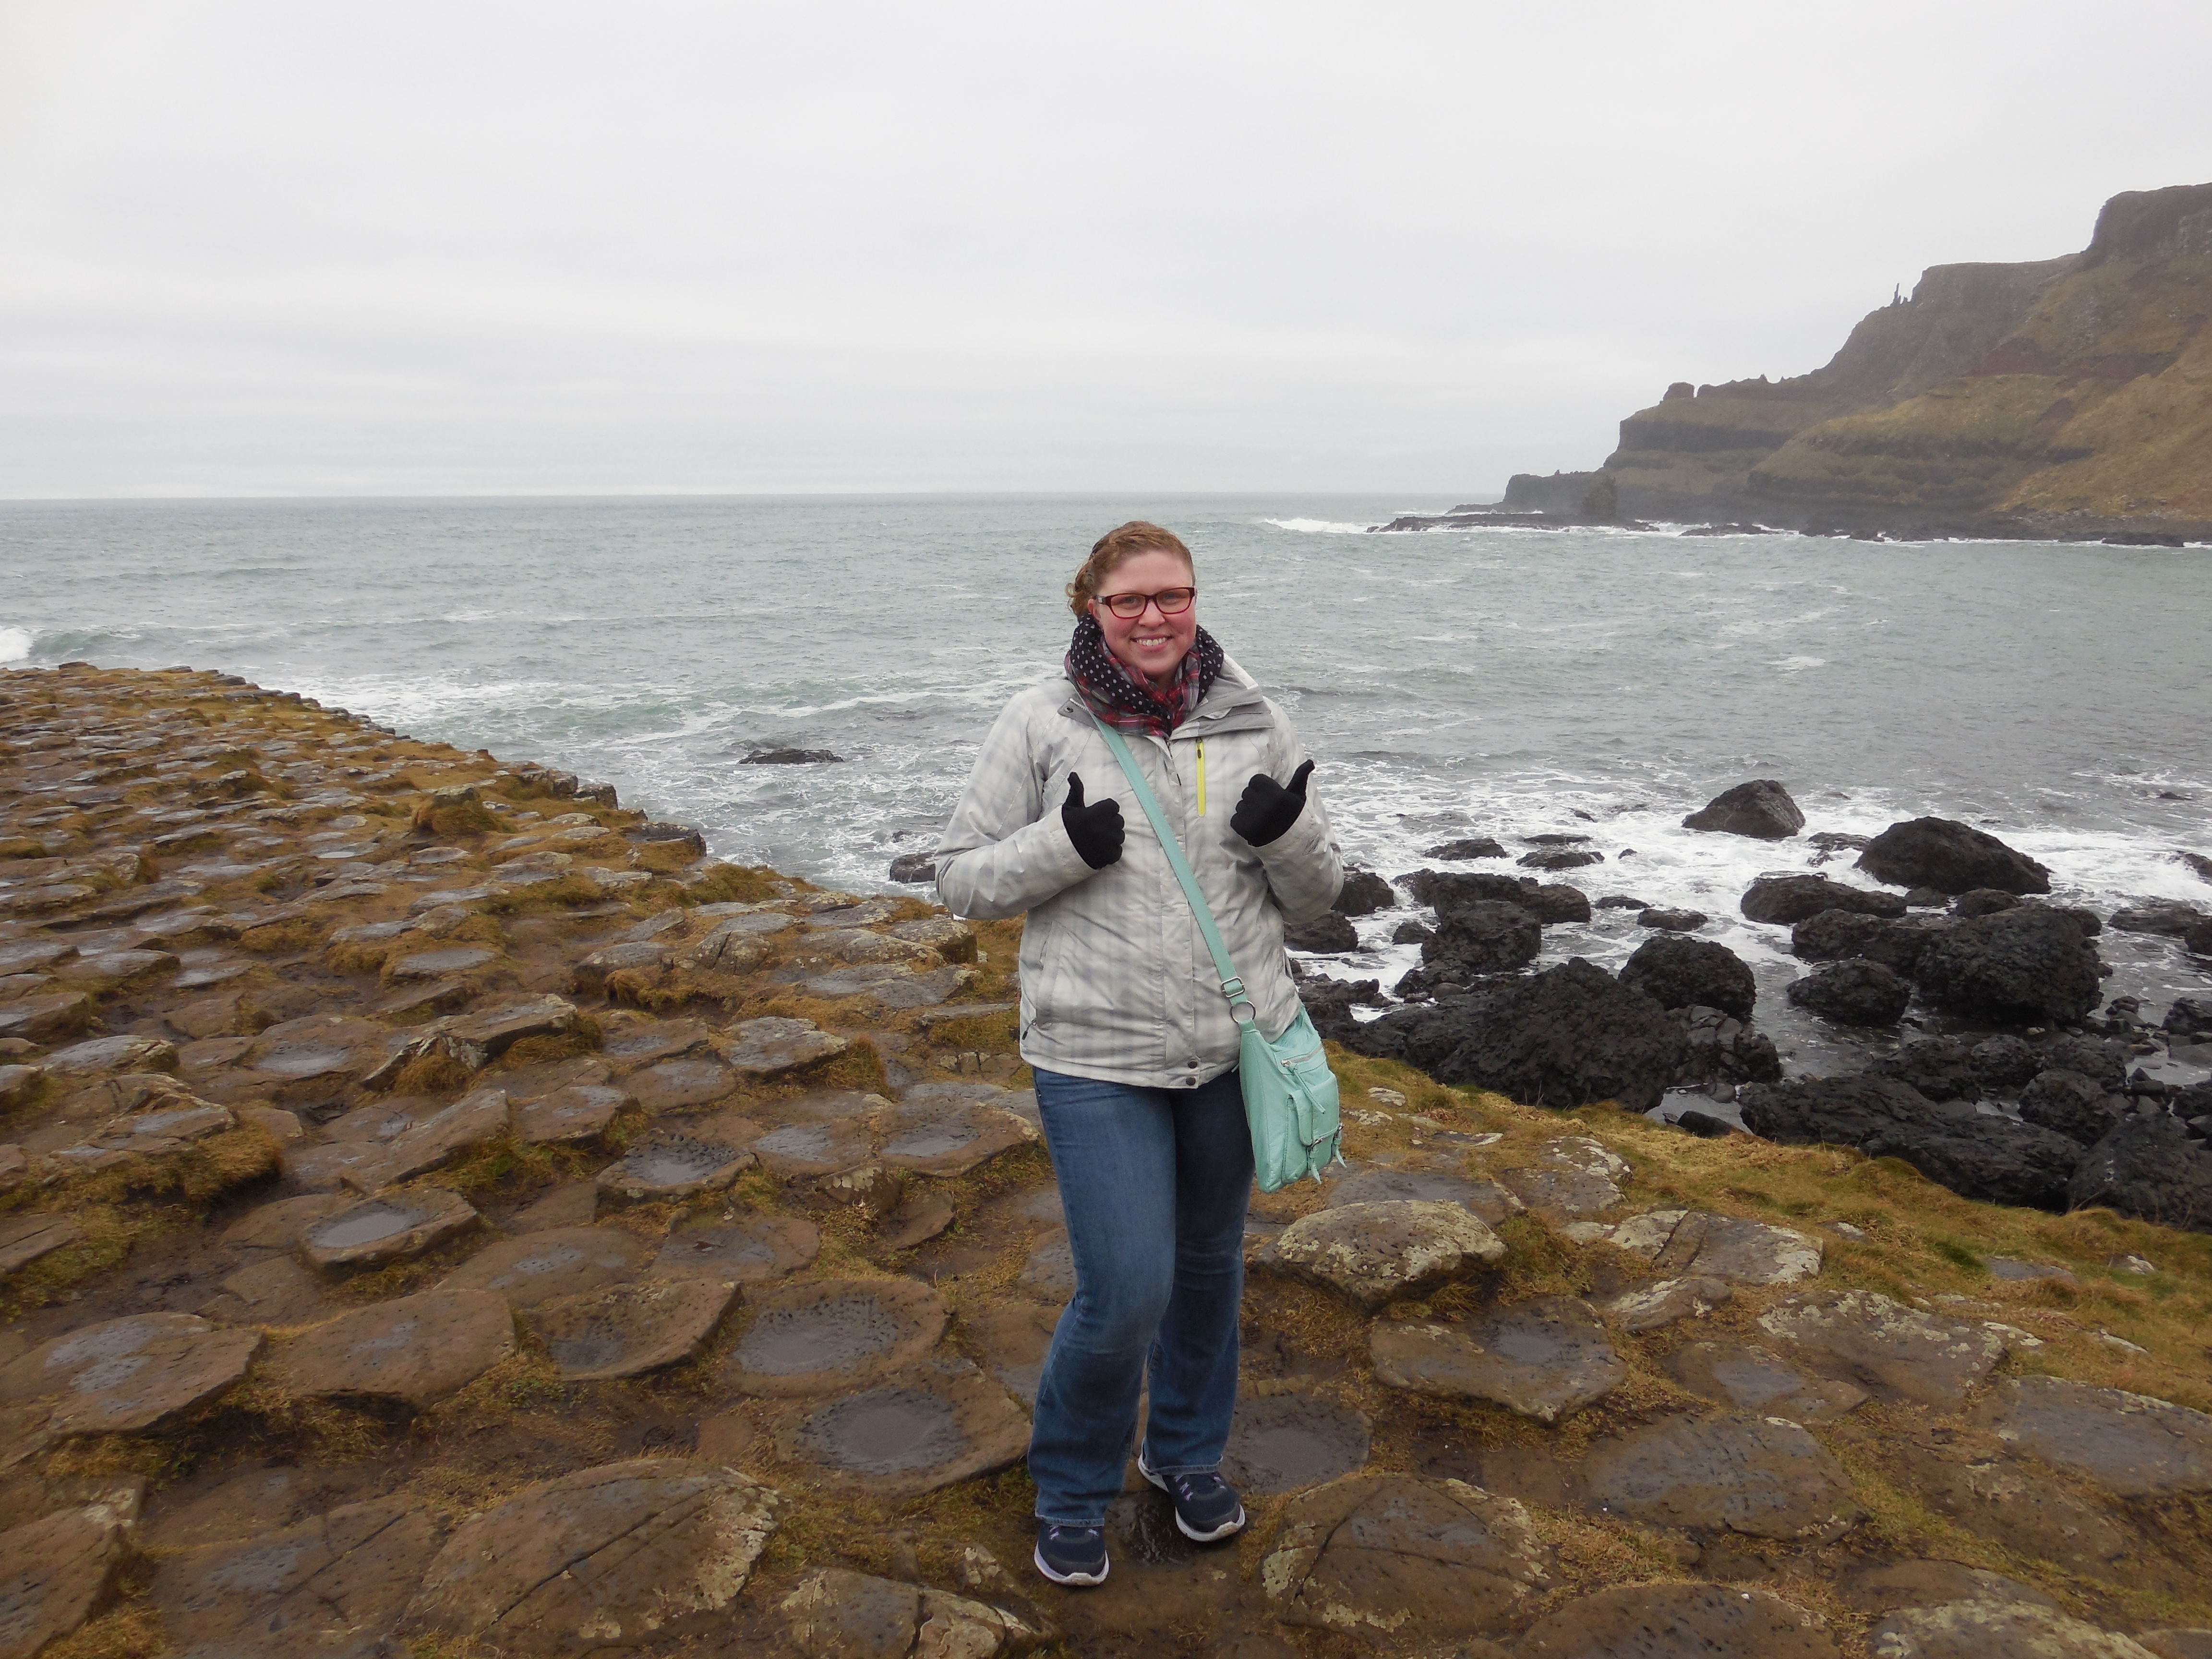 Giant's Causeway is a natural landformation with an awesome folklore behind it.